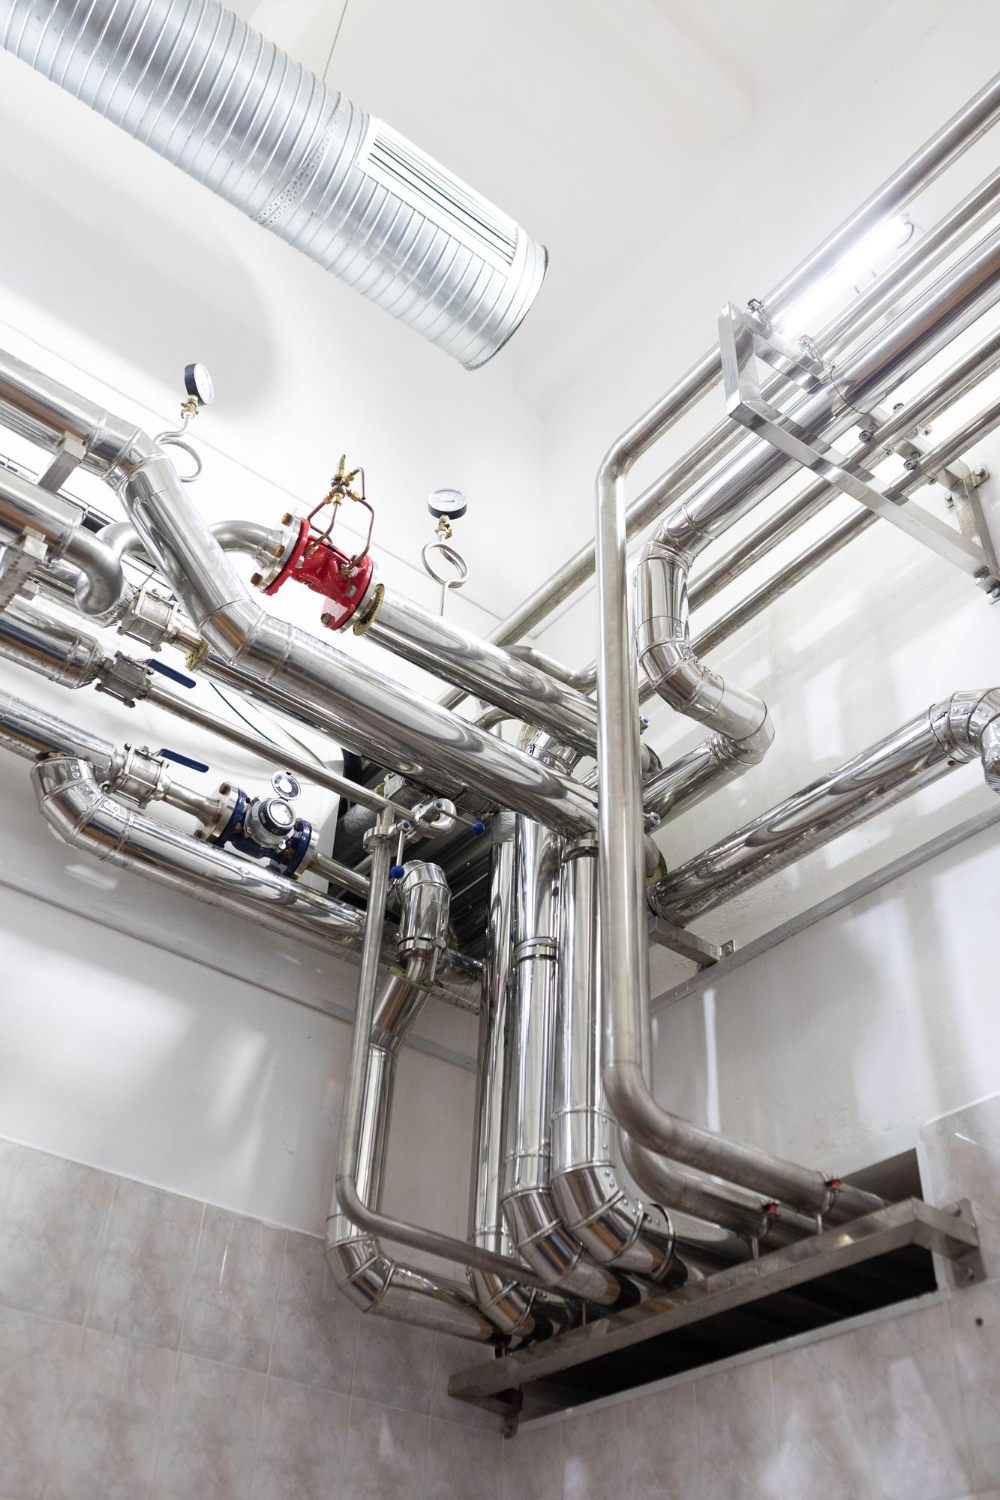 Plumbing services, Pipe fitting